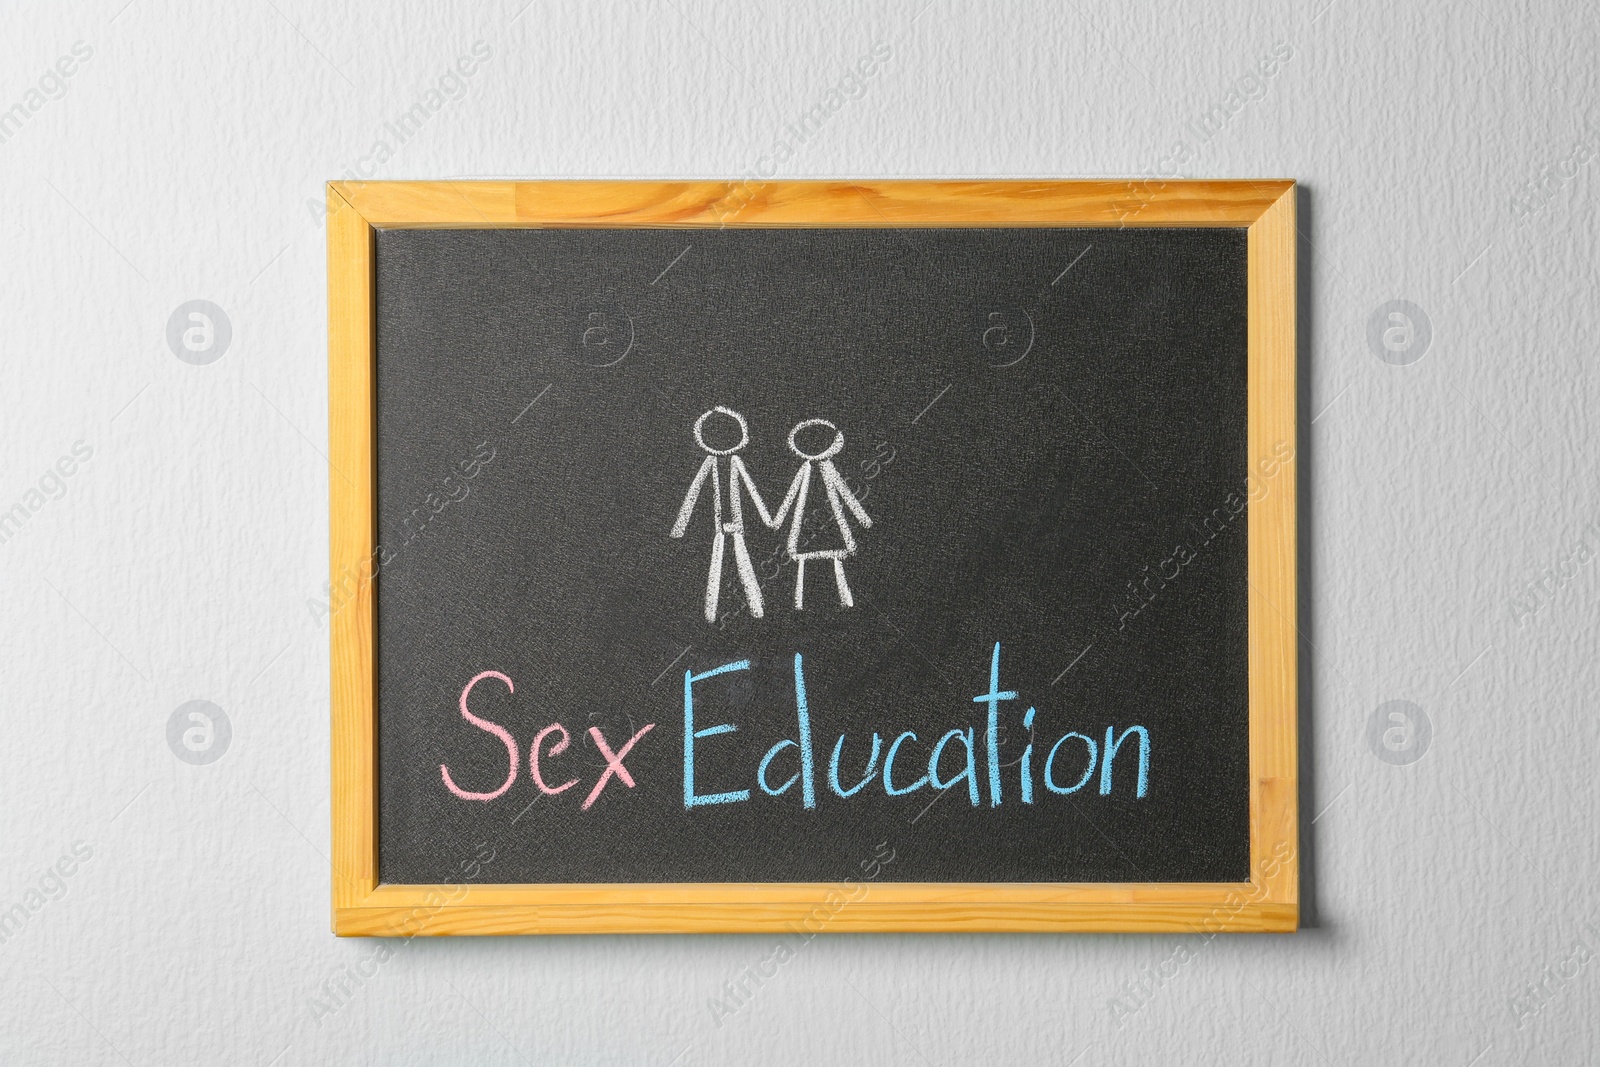 Photo of Small blackboard with written phrase "SEX EDUCATION" on white wall